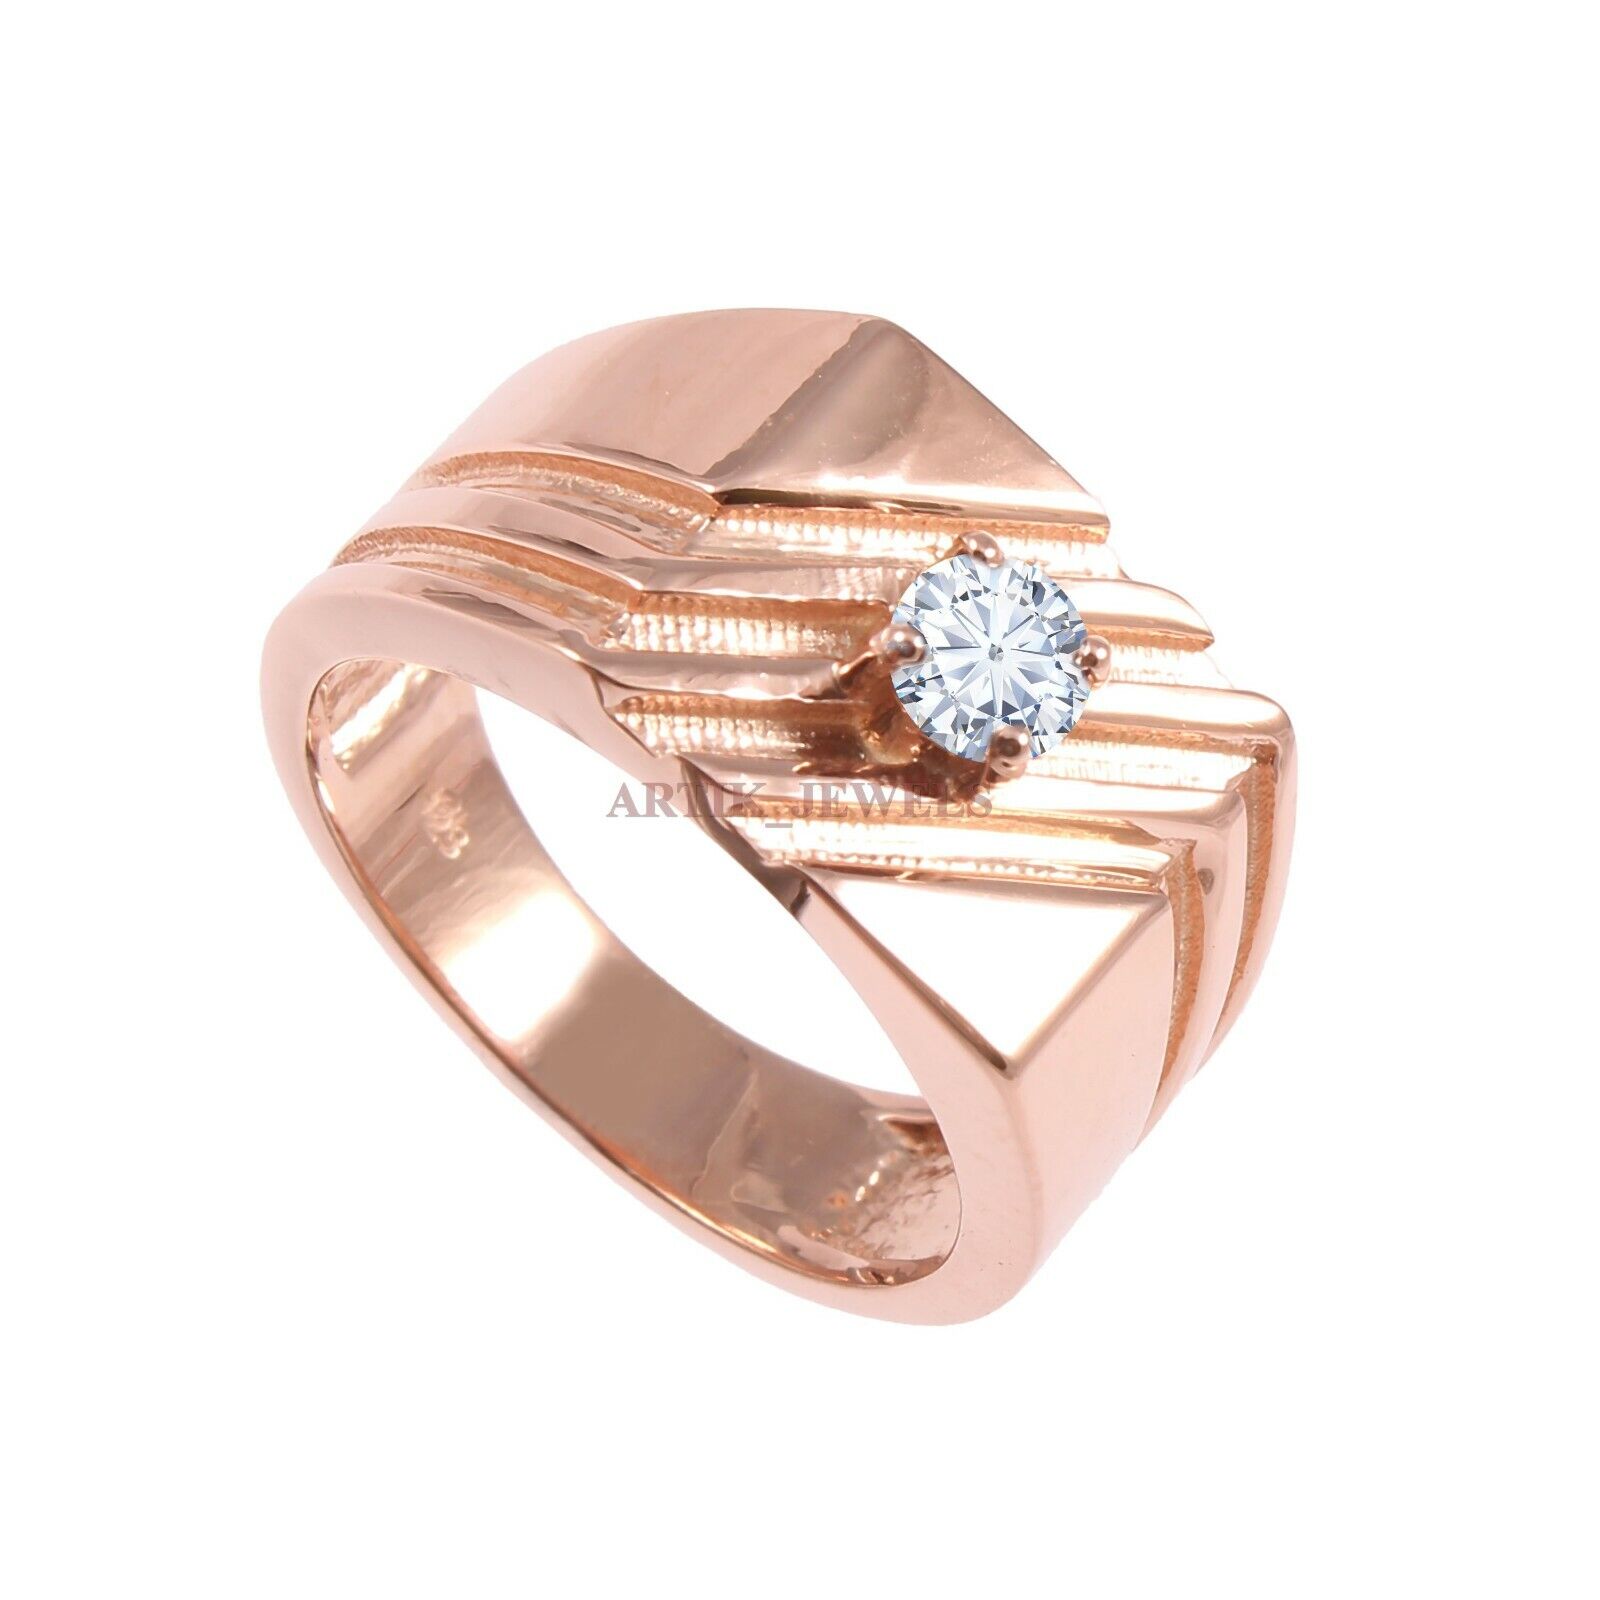 Natural White Topaz Gemstone with Rose Gold Plated 925 Sterling Silver Ring 1699 Kupowanie nowej bomby